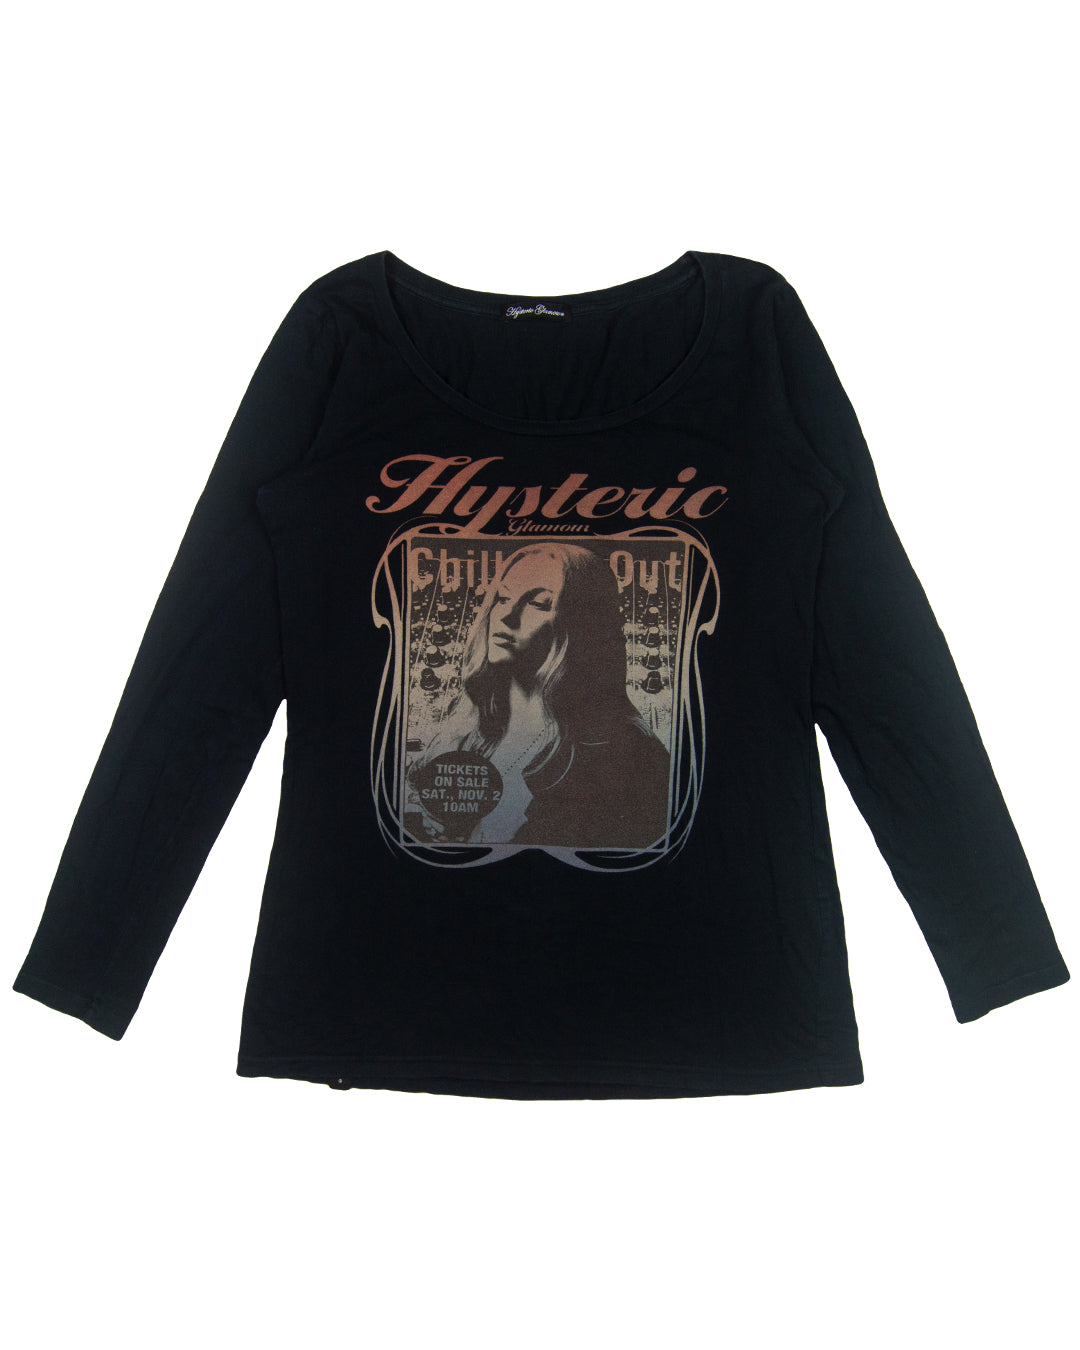 Hysteric Glamour Chill Out Graphic Long Sleeve Tee